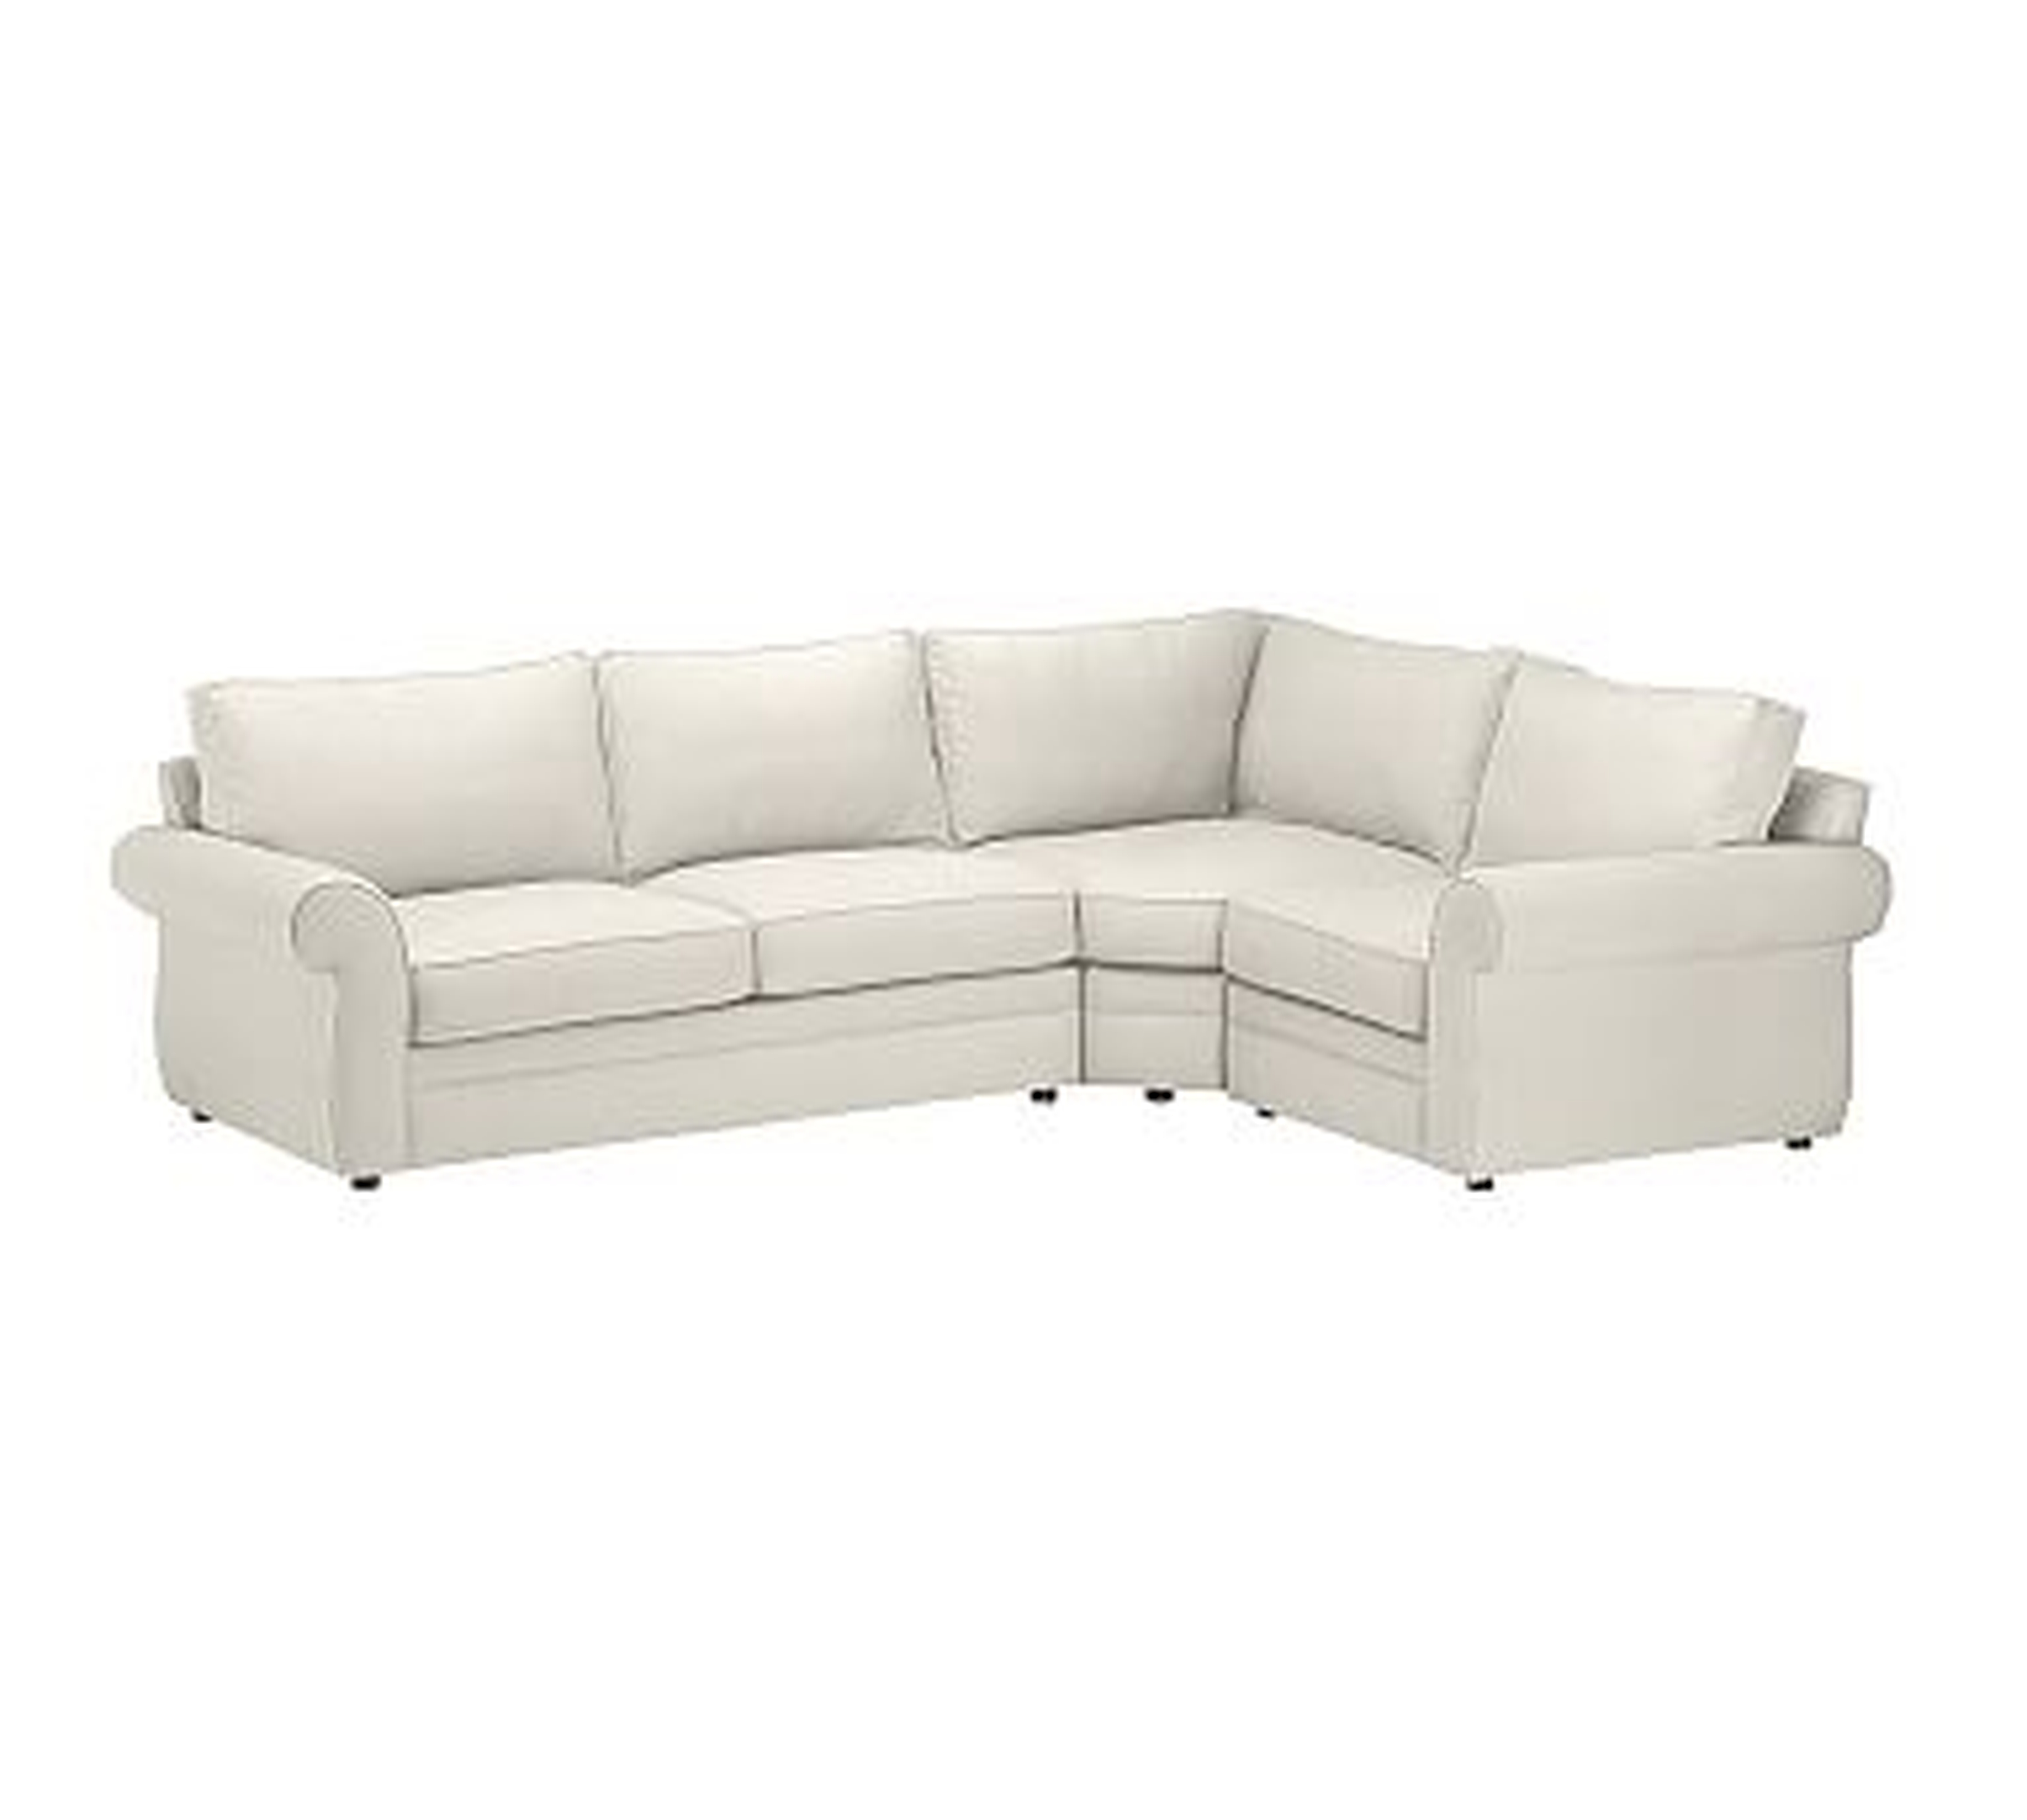 Pearce Roll Arm Upholstered Left Arm 3-Piece Wedge Sectional, Down Blend Wrapped Cushions, Performance Everydaysuede(TM) Stone - Pottery Barn